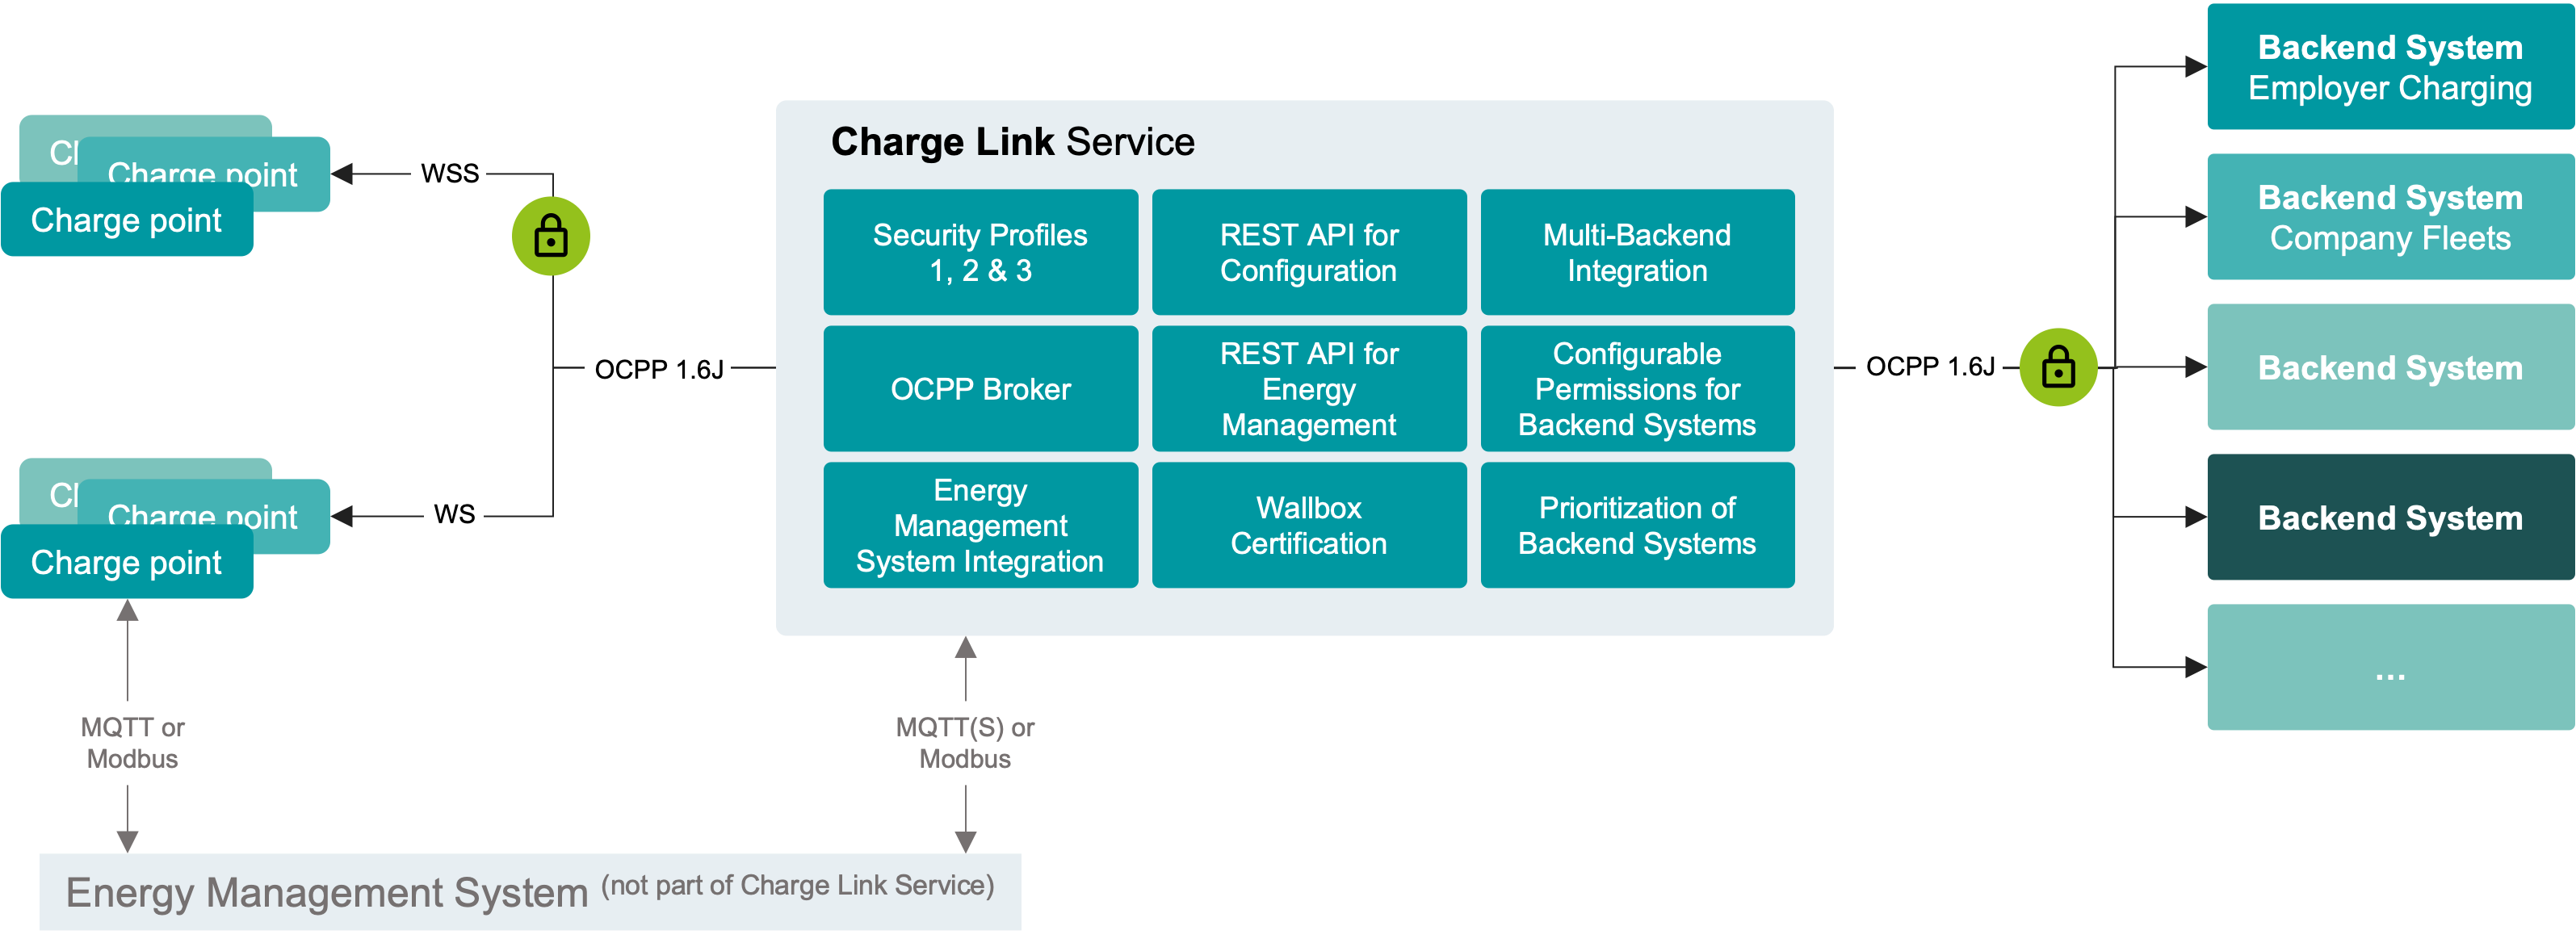 OCPP - The solution with the Charge Link Service